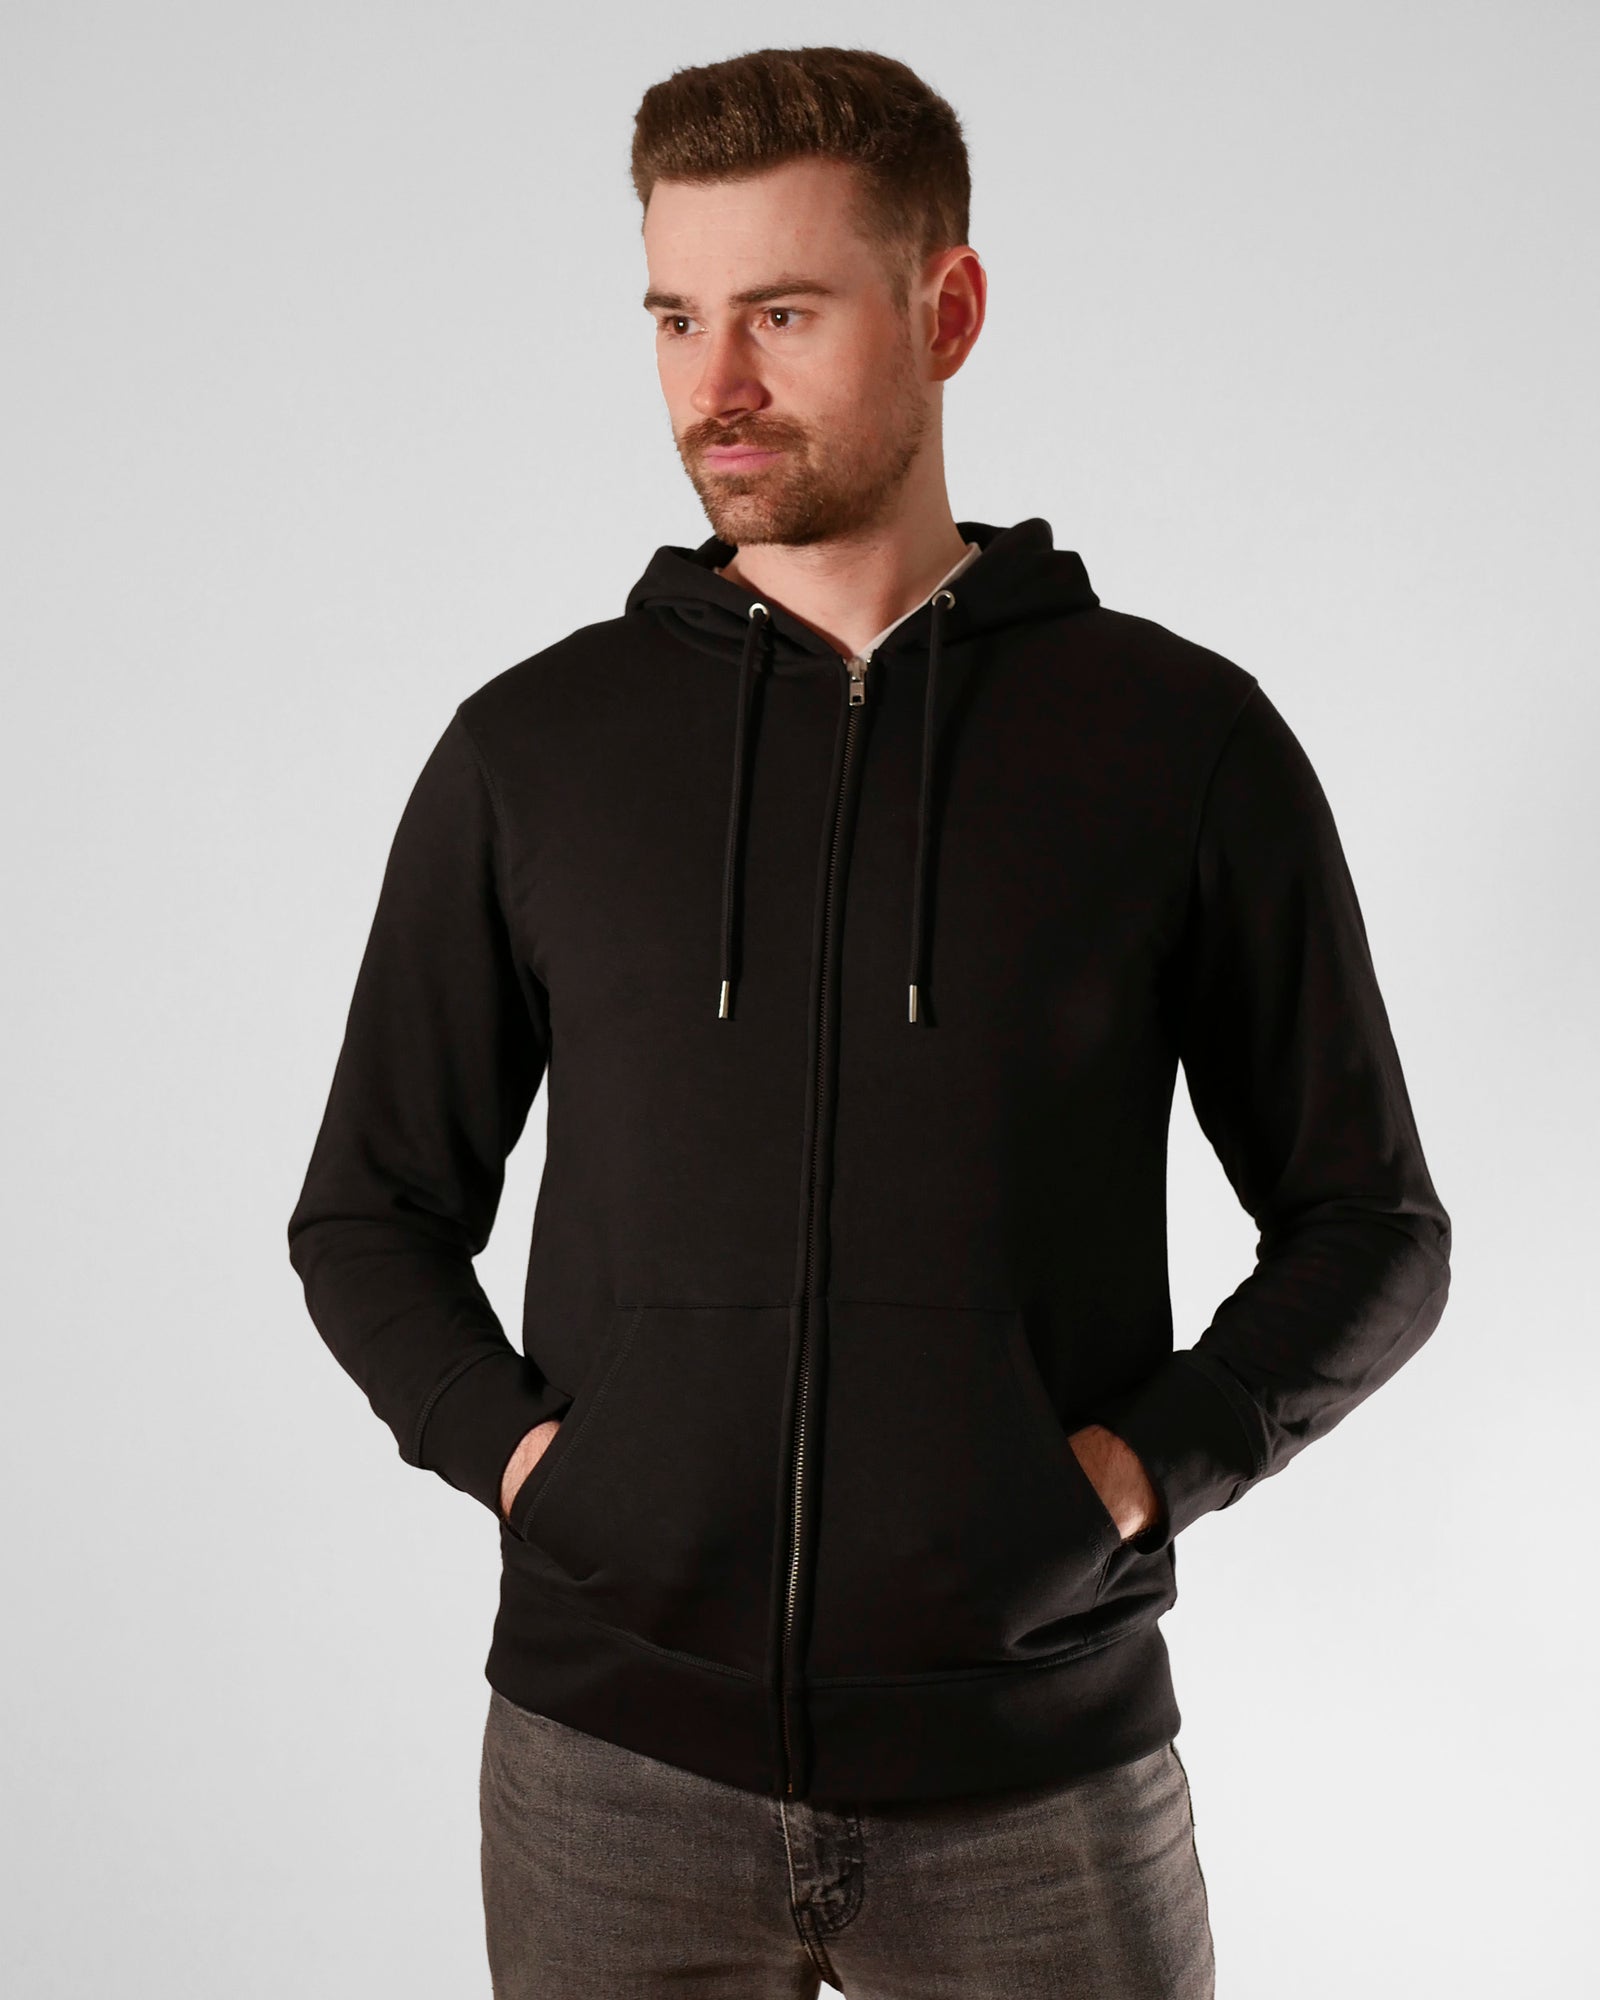 Think outside the box | 3-Style Hoodie